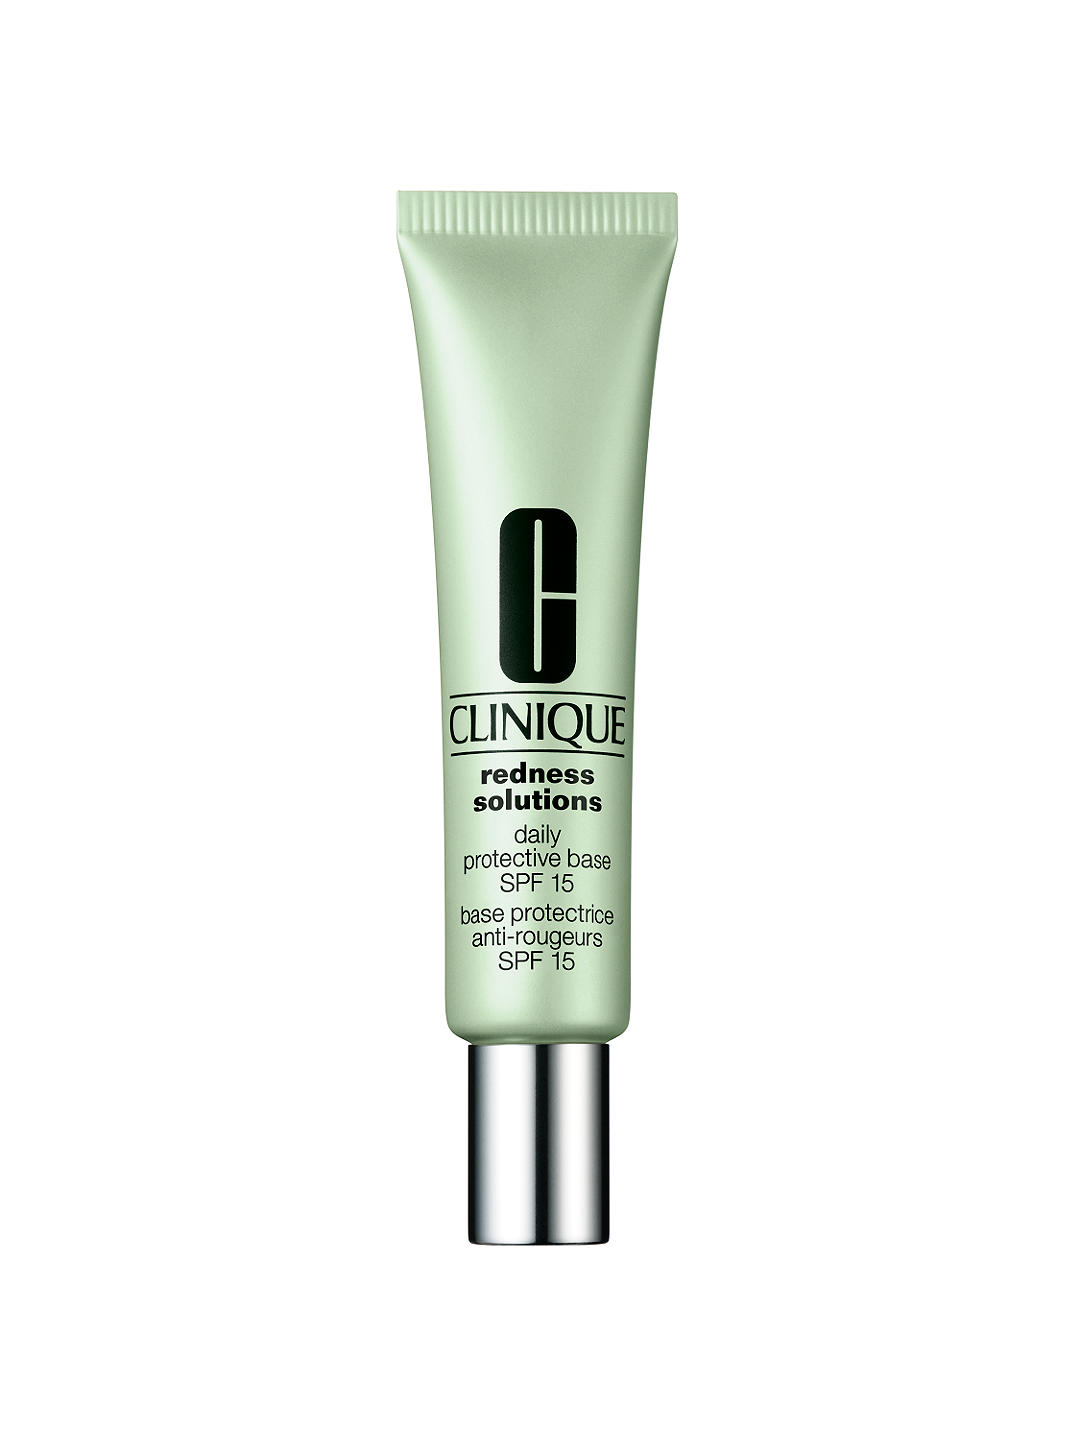 Clinique Redness Solutions Daily Protective Base SPF15 - For All Skin Types With Redness, 40ml 1